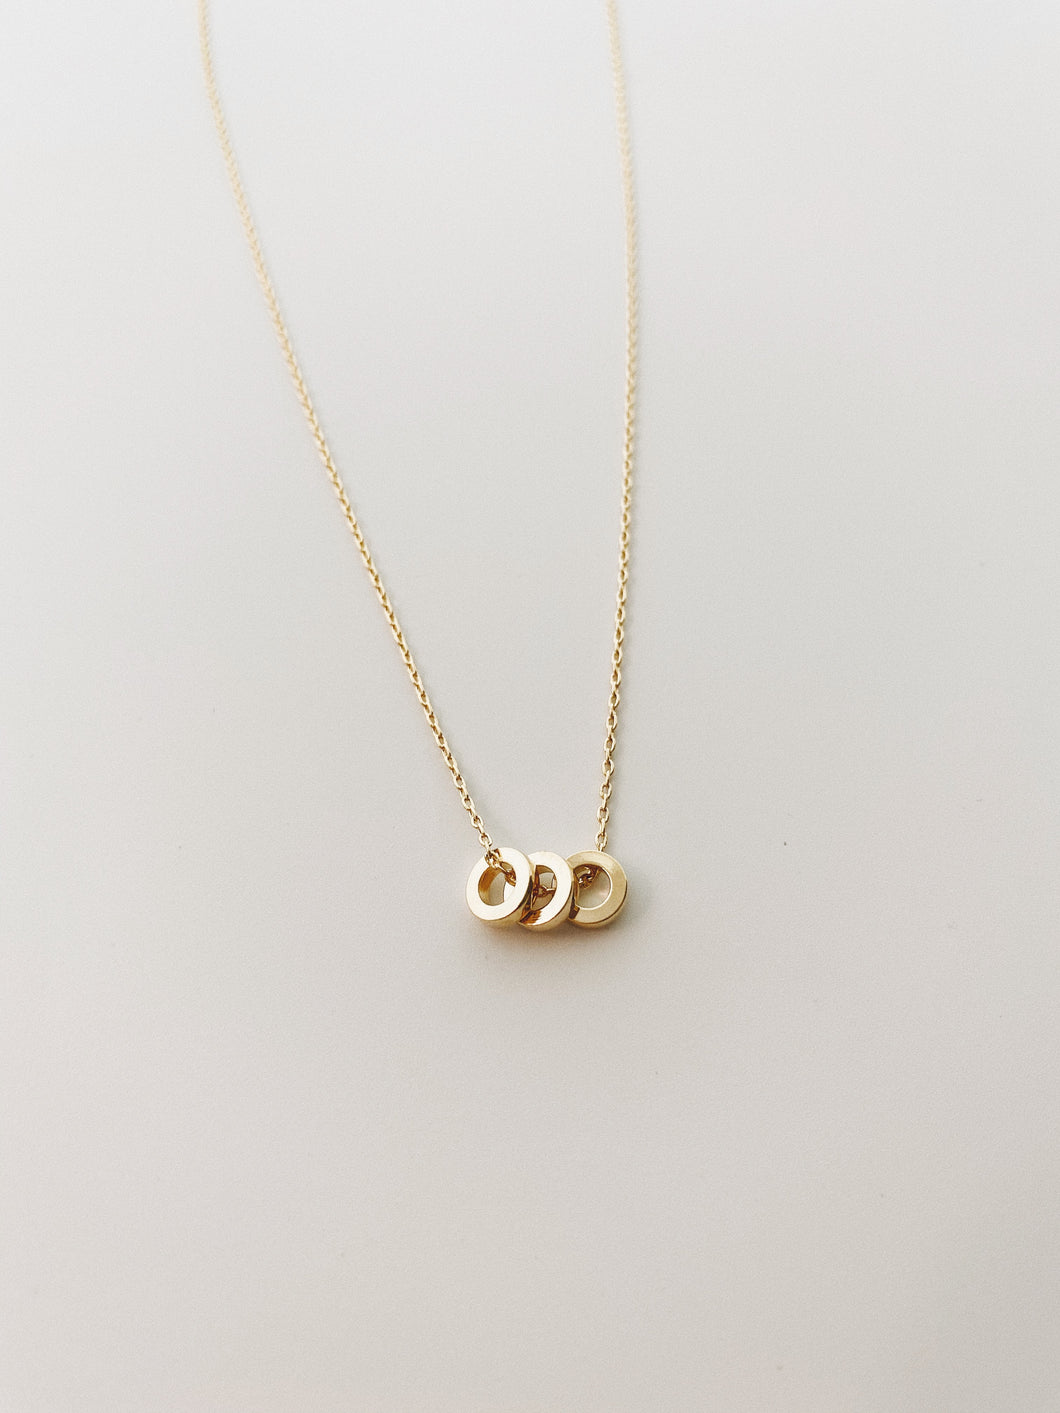 Triple ring necklace